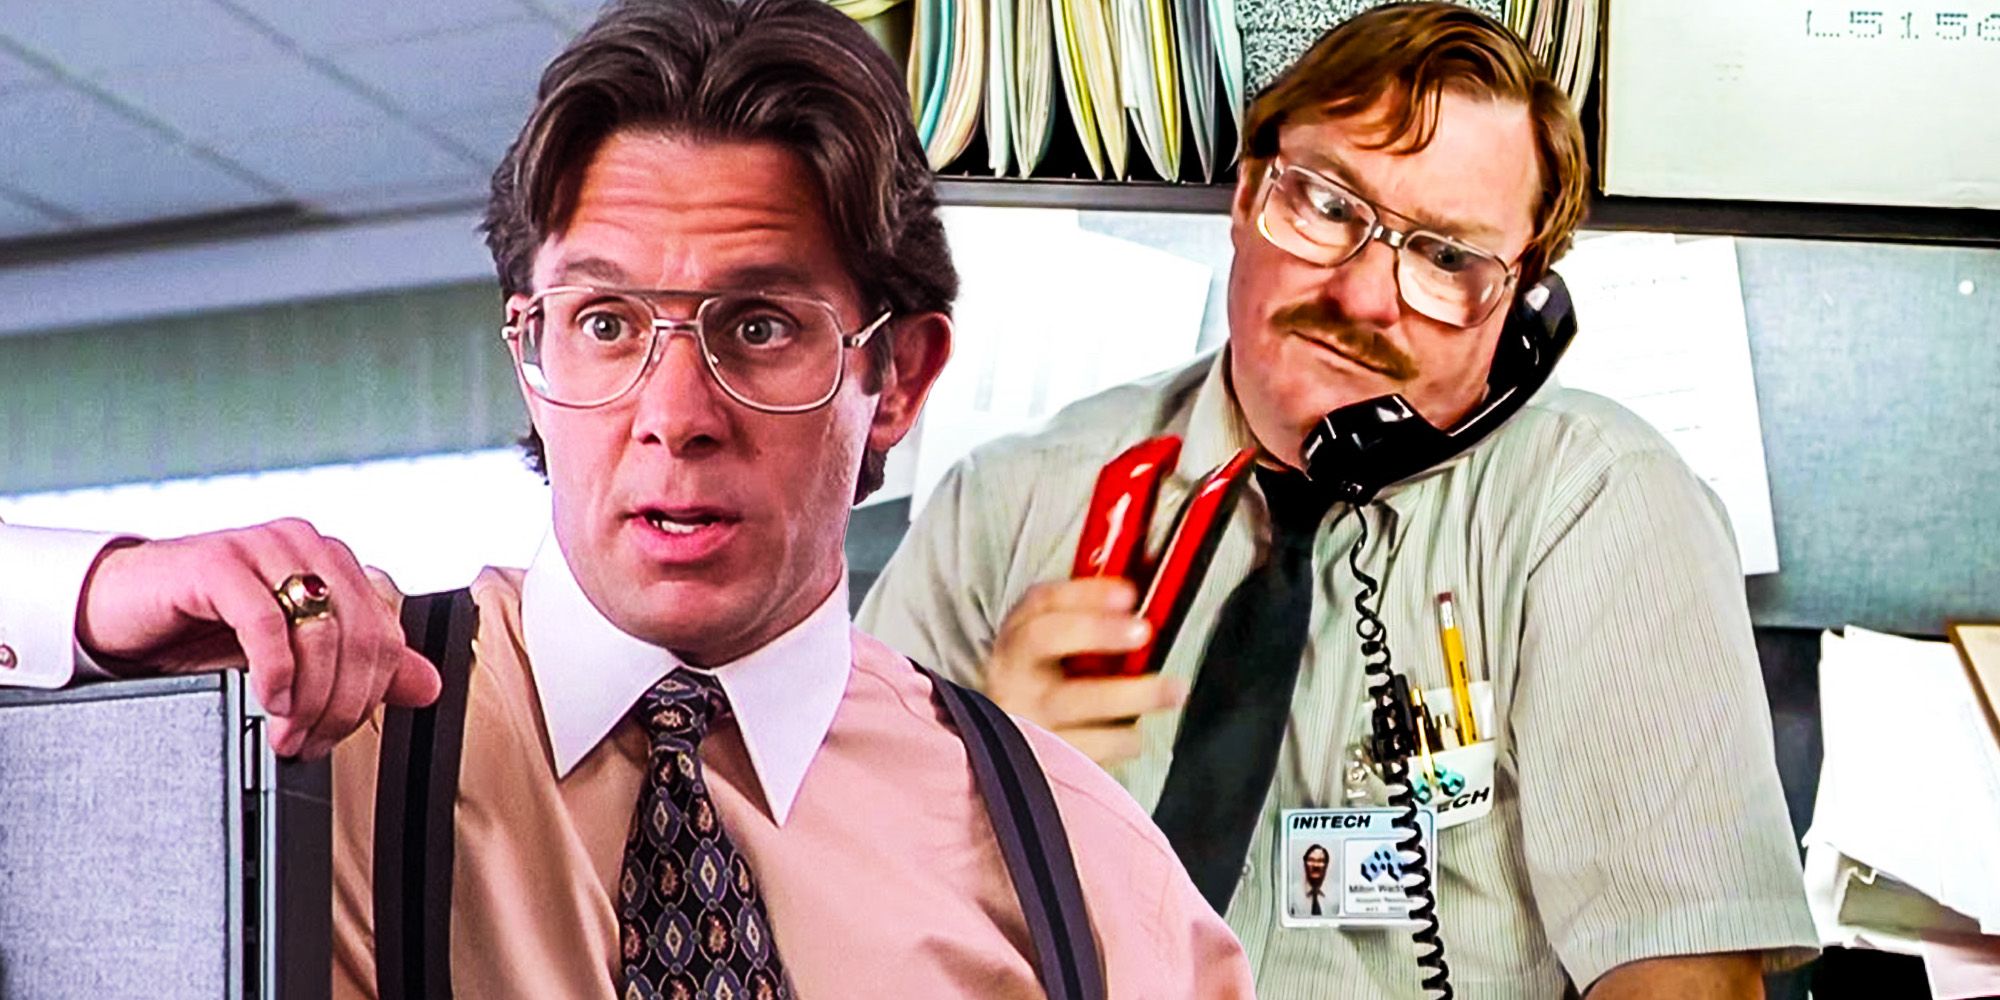 office space stapler guy quotes